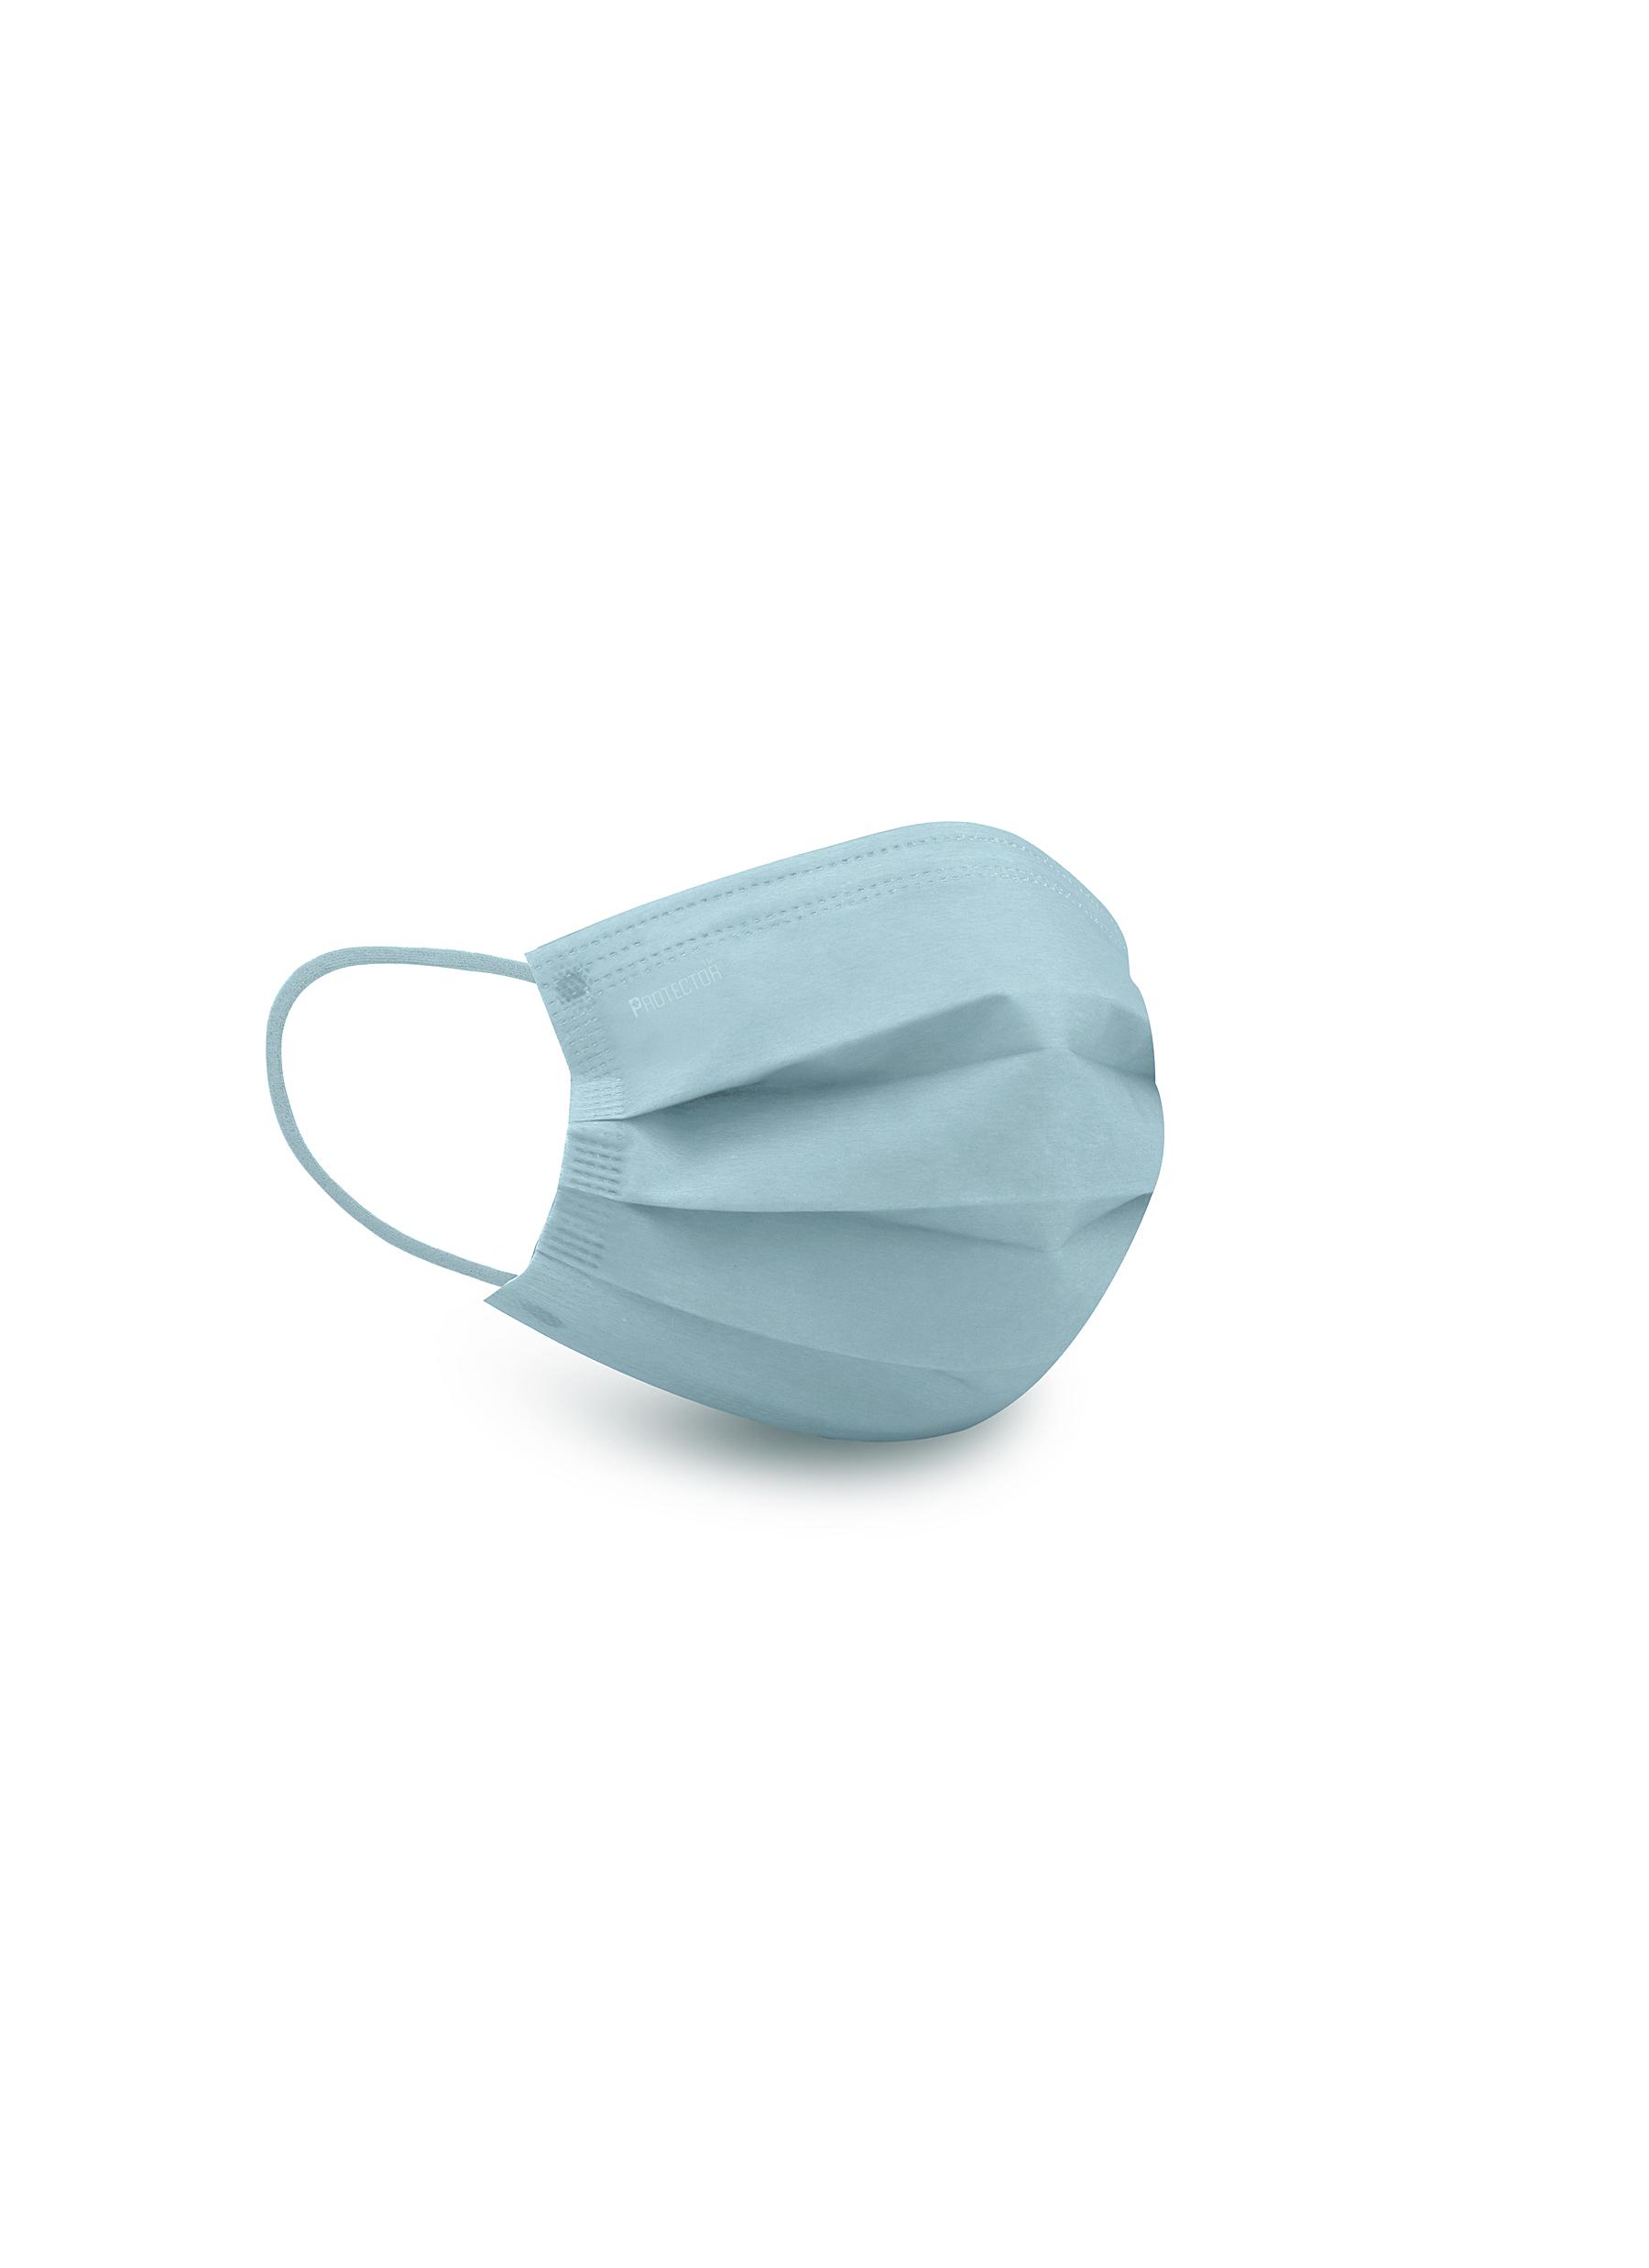 Protector Small Surgical Mask Pack Of 30 - Teardrop